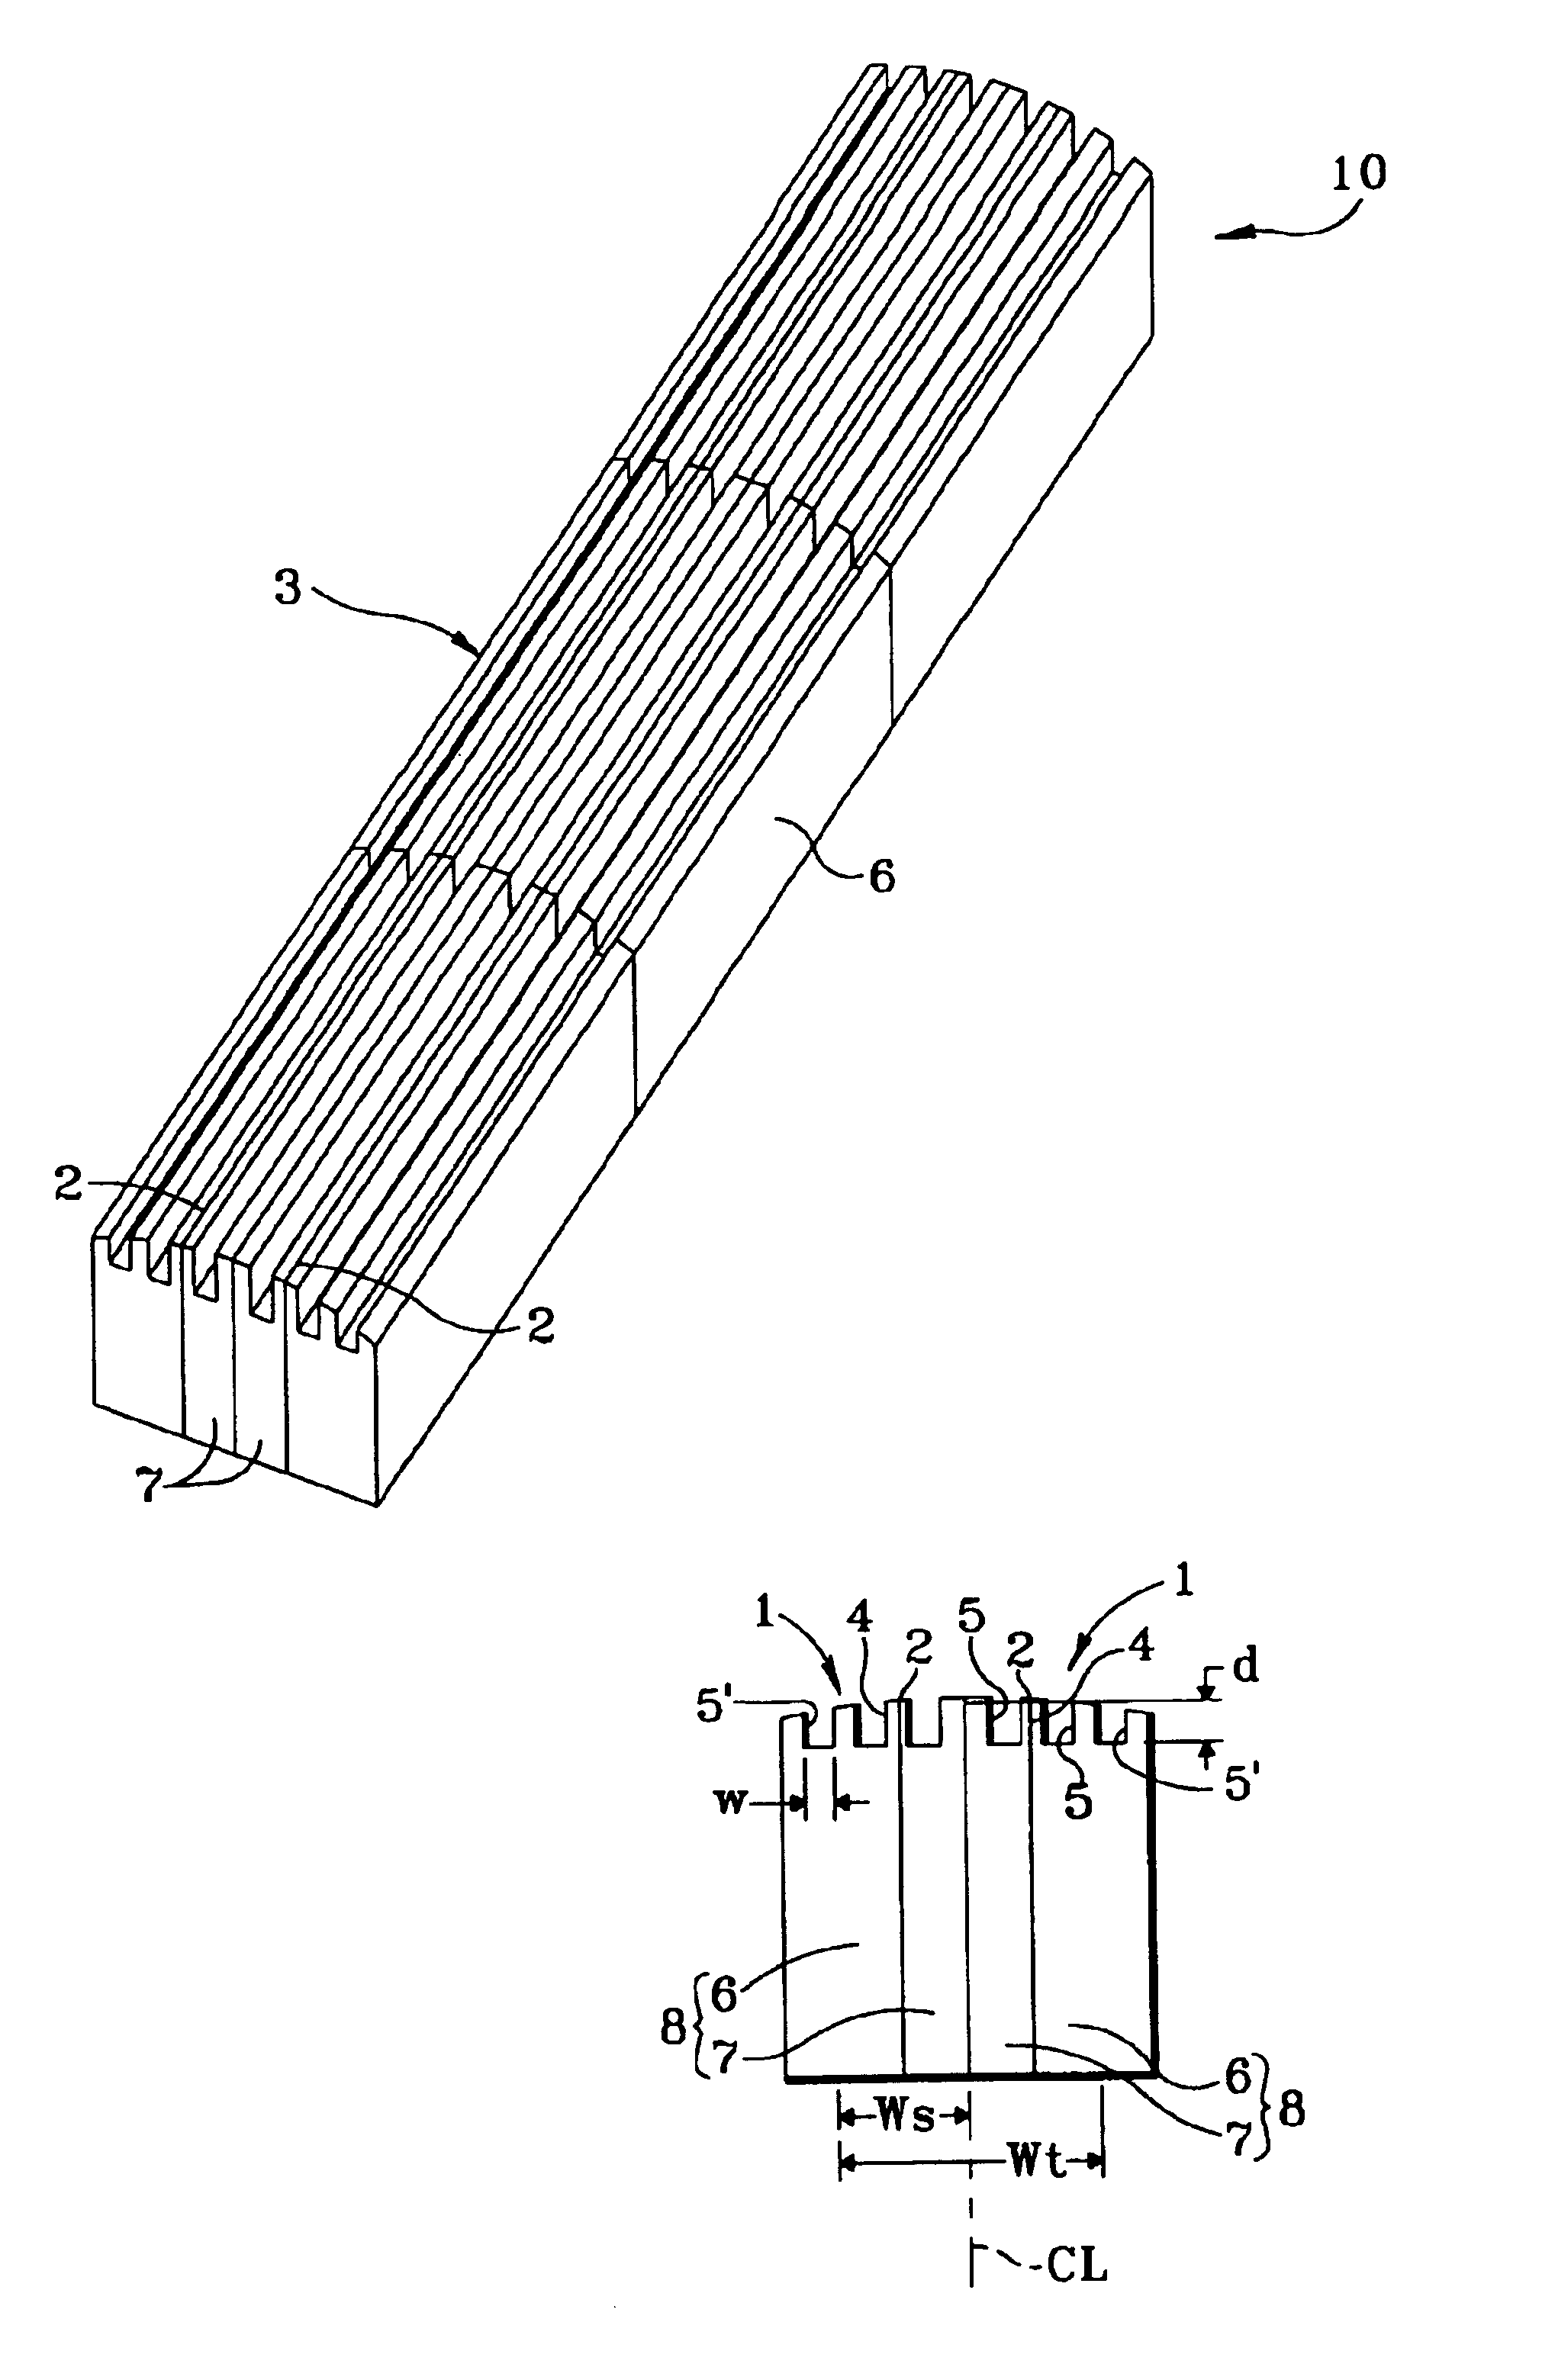 Read/write head for a magnetic tape device having grooves for reducing tape floating